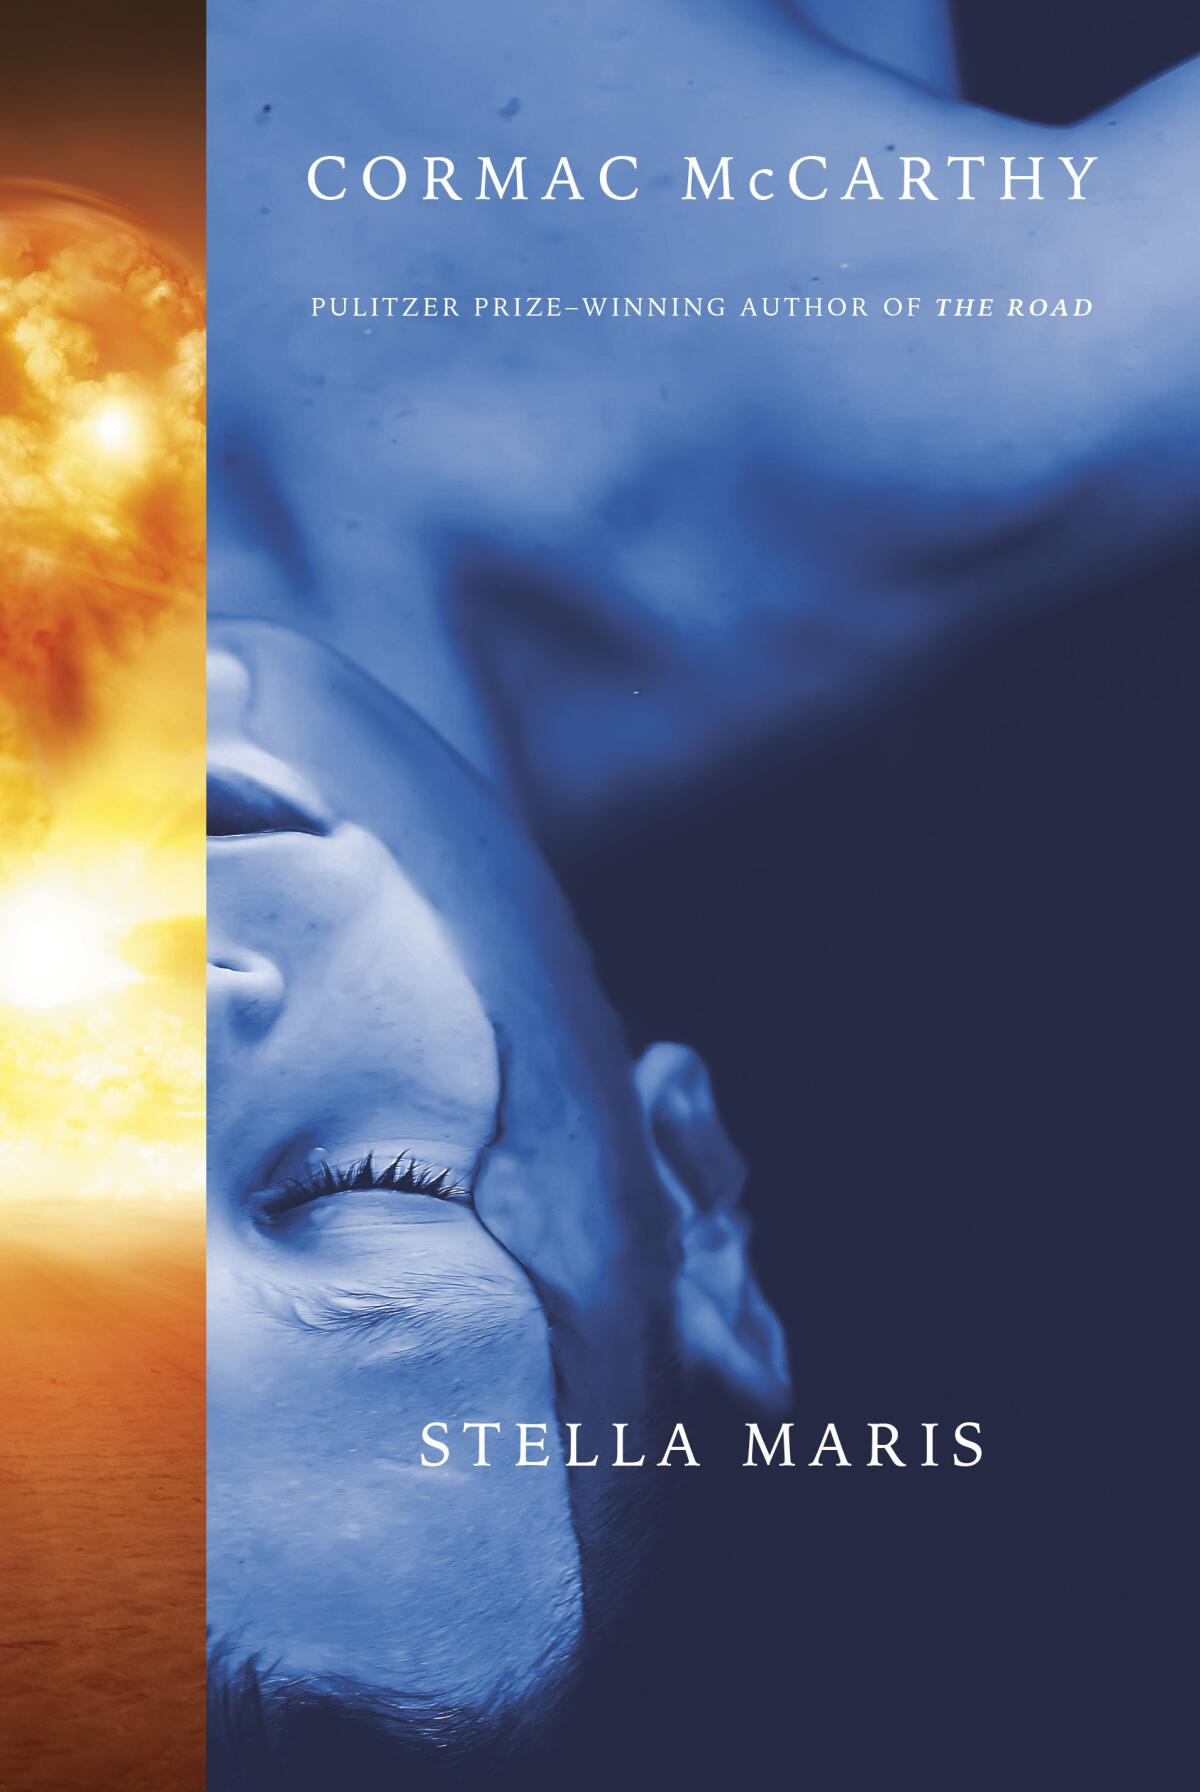 Cover of "Stella Maris," by Cormac McCarthy